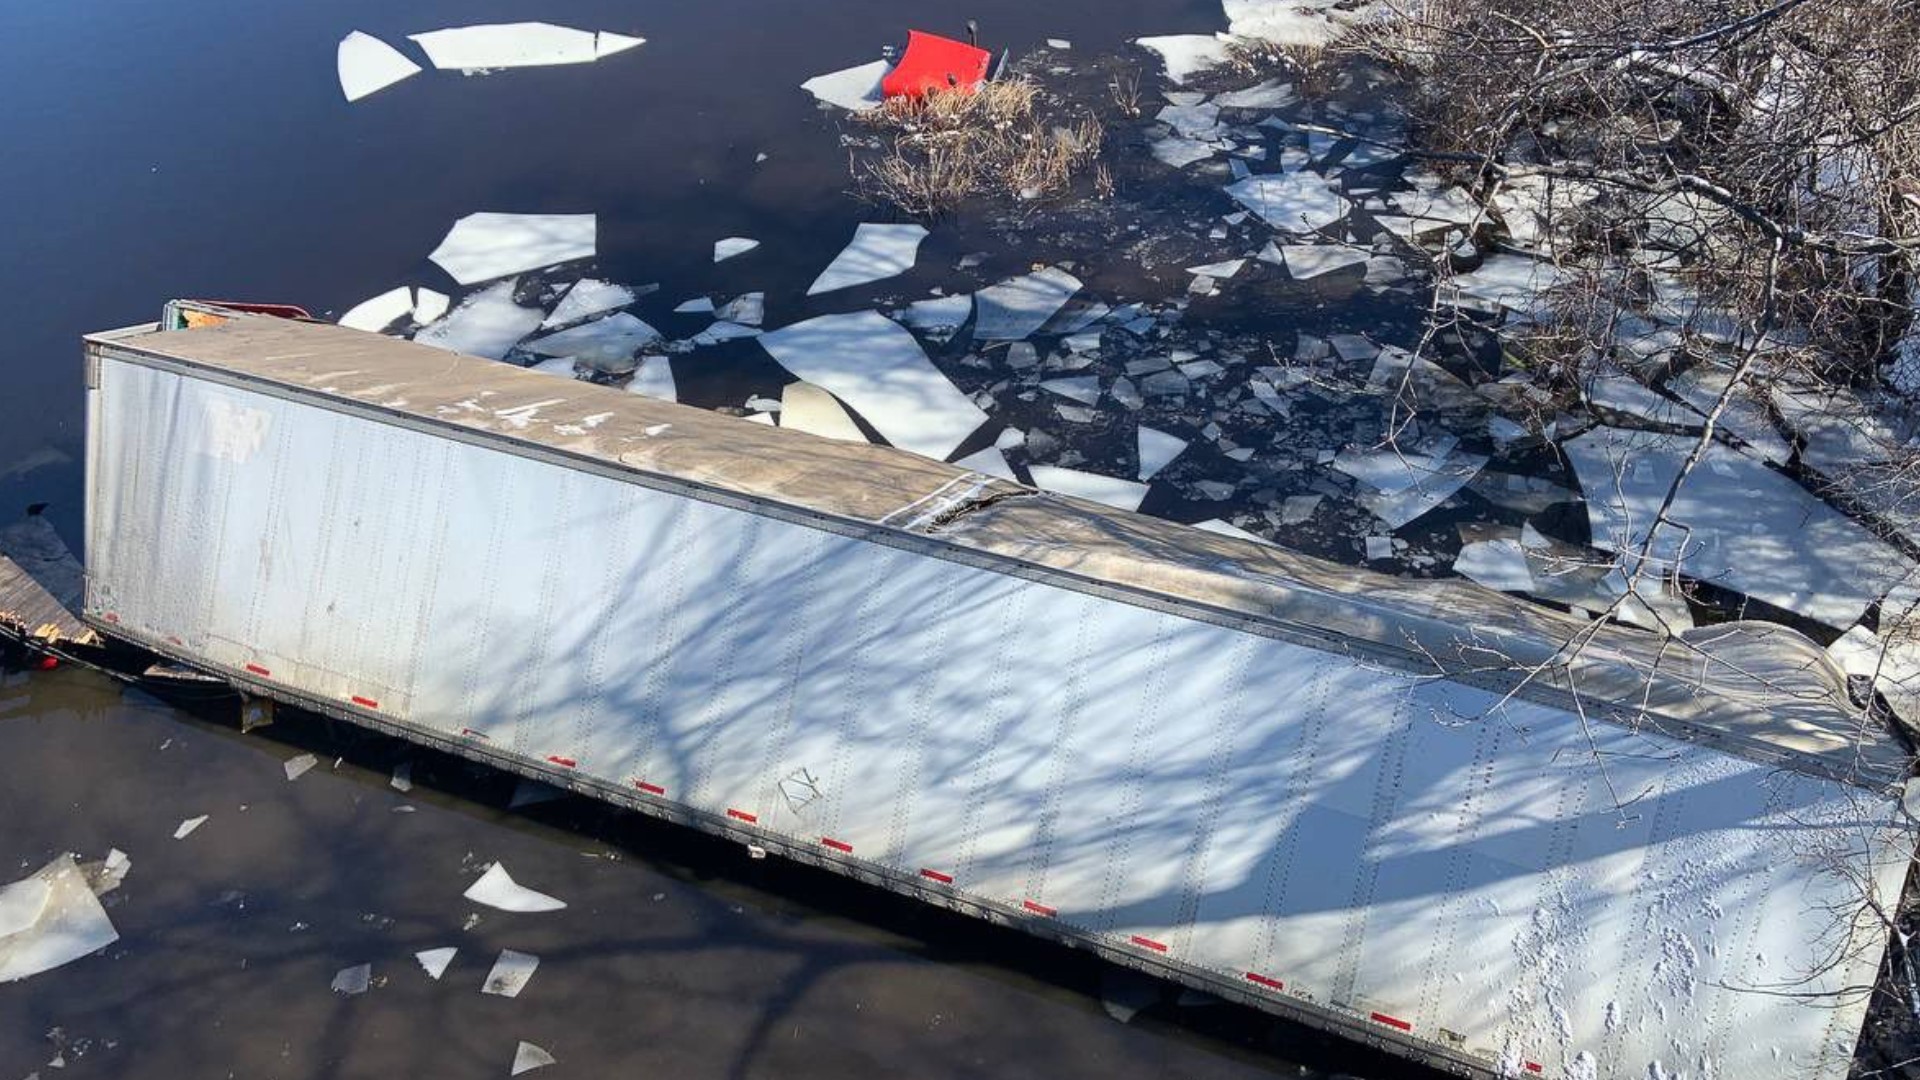 Video, captured by the State Police Association of Massachusetts, shows the tractor-trailer carrying mail leaving the roadway and falling into the river.